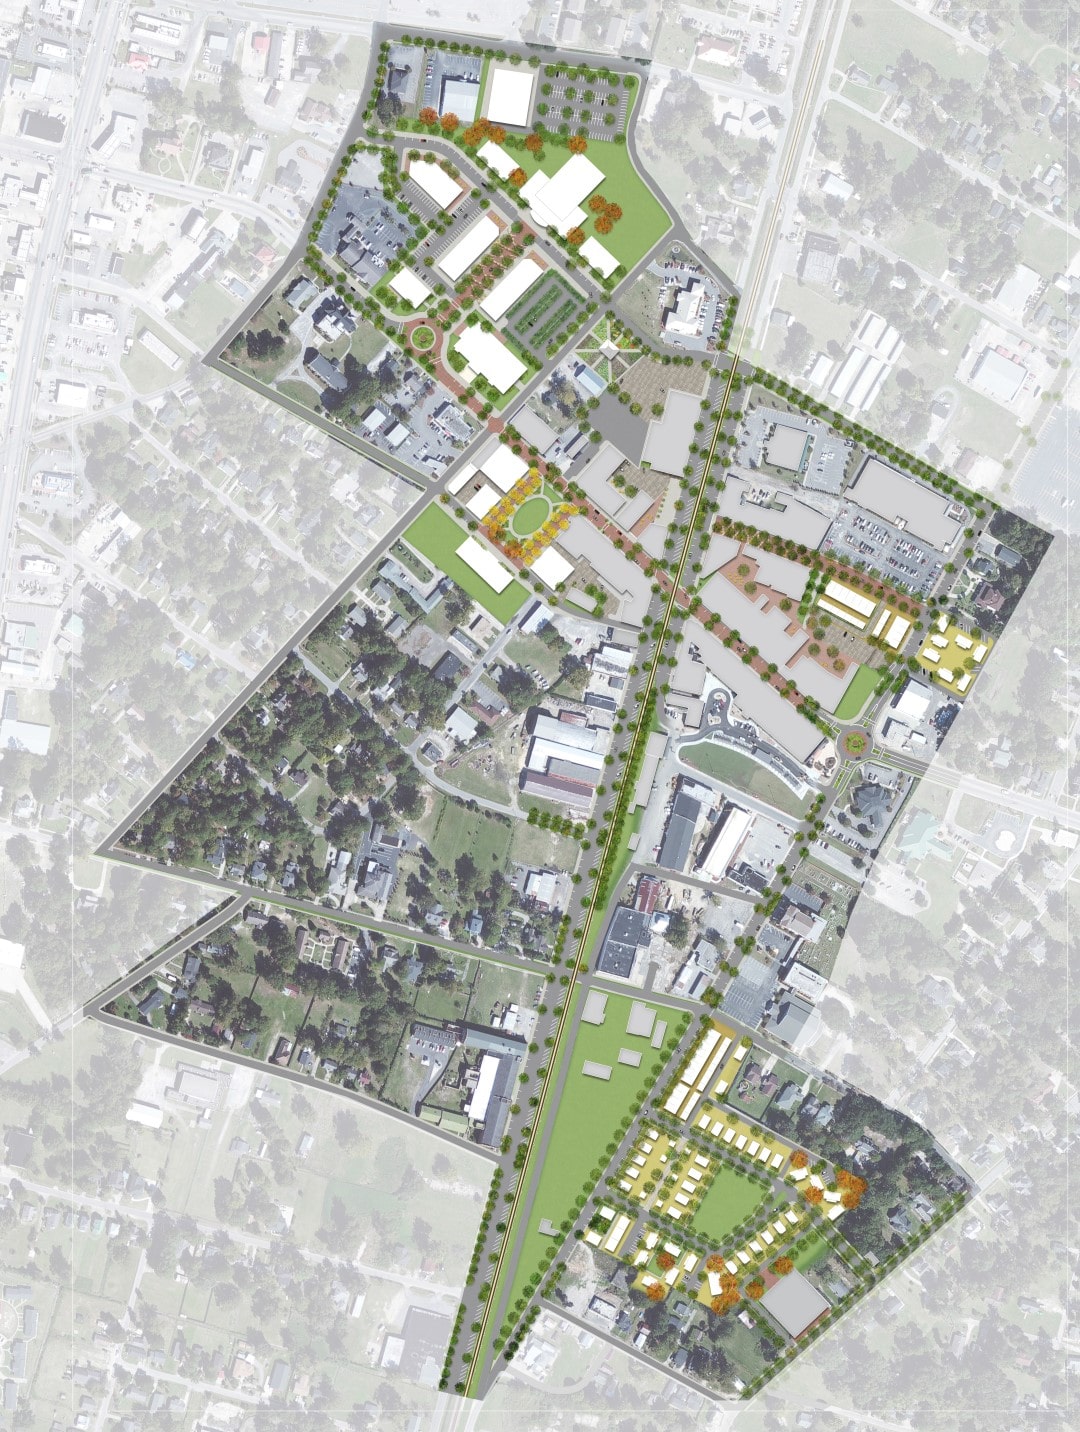 Cultivate Lake City: Downtown Master Plan